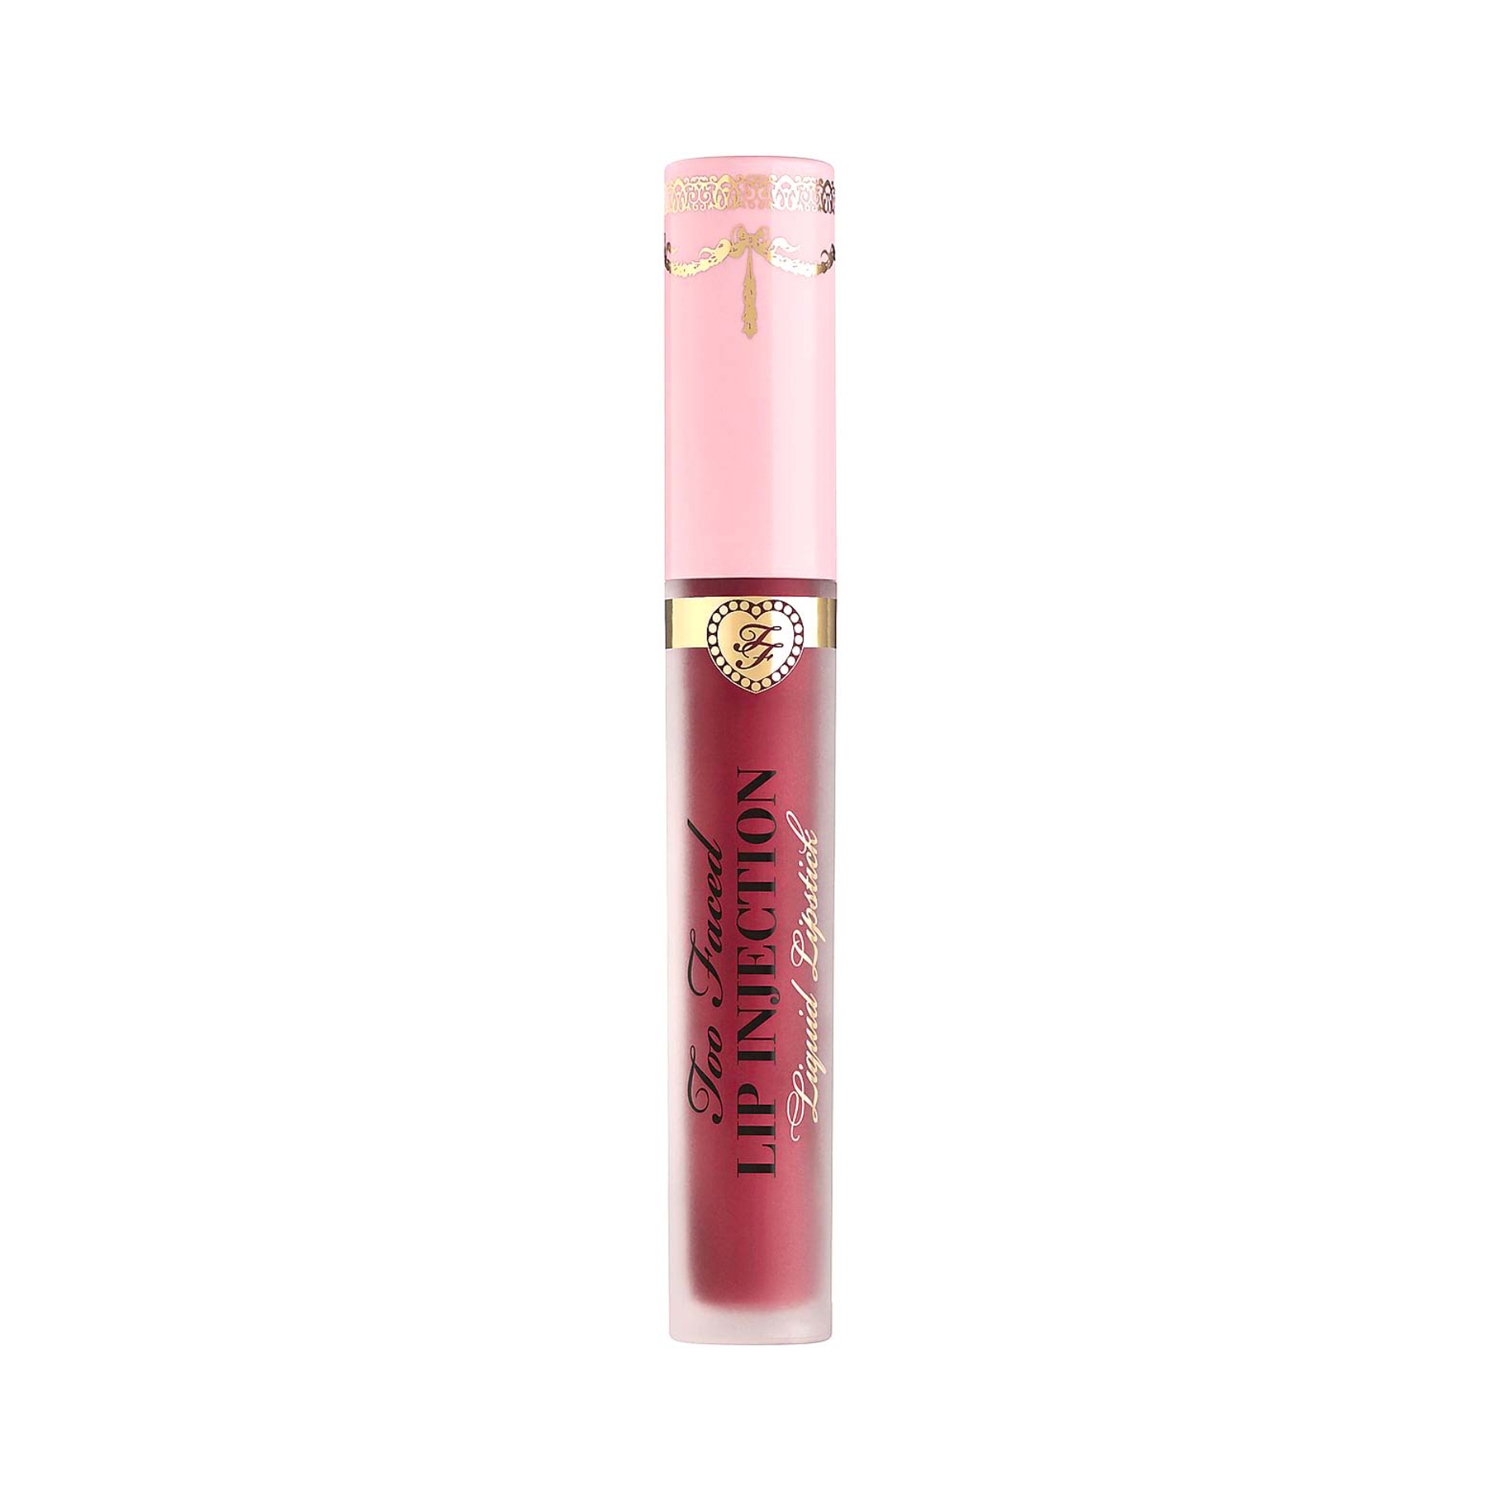 Too Faced | Too Faced Lip Injection Liquid Lipstick - Big Lip Energy (3ml)